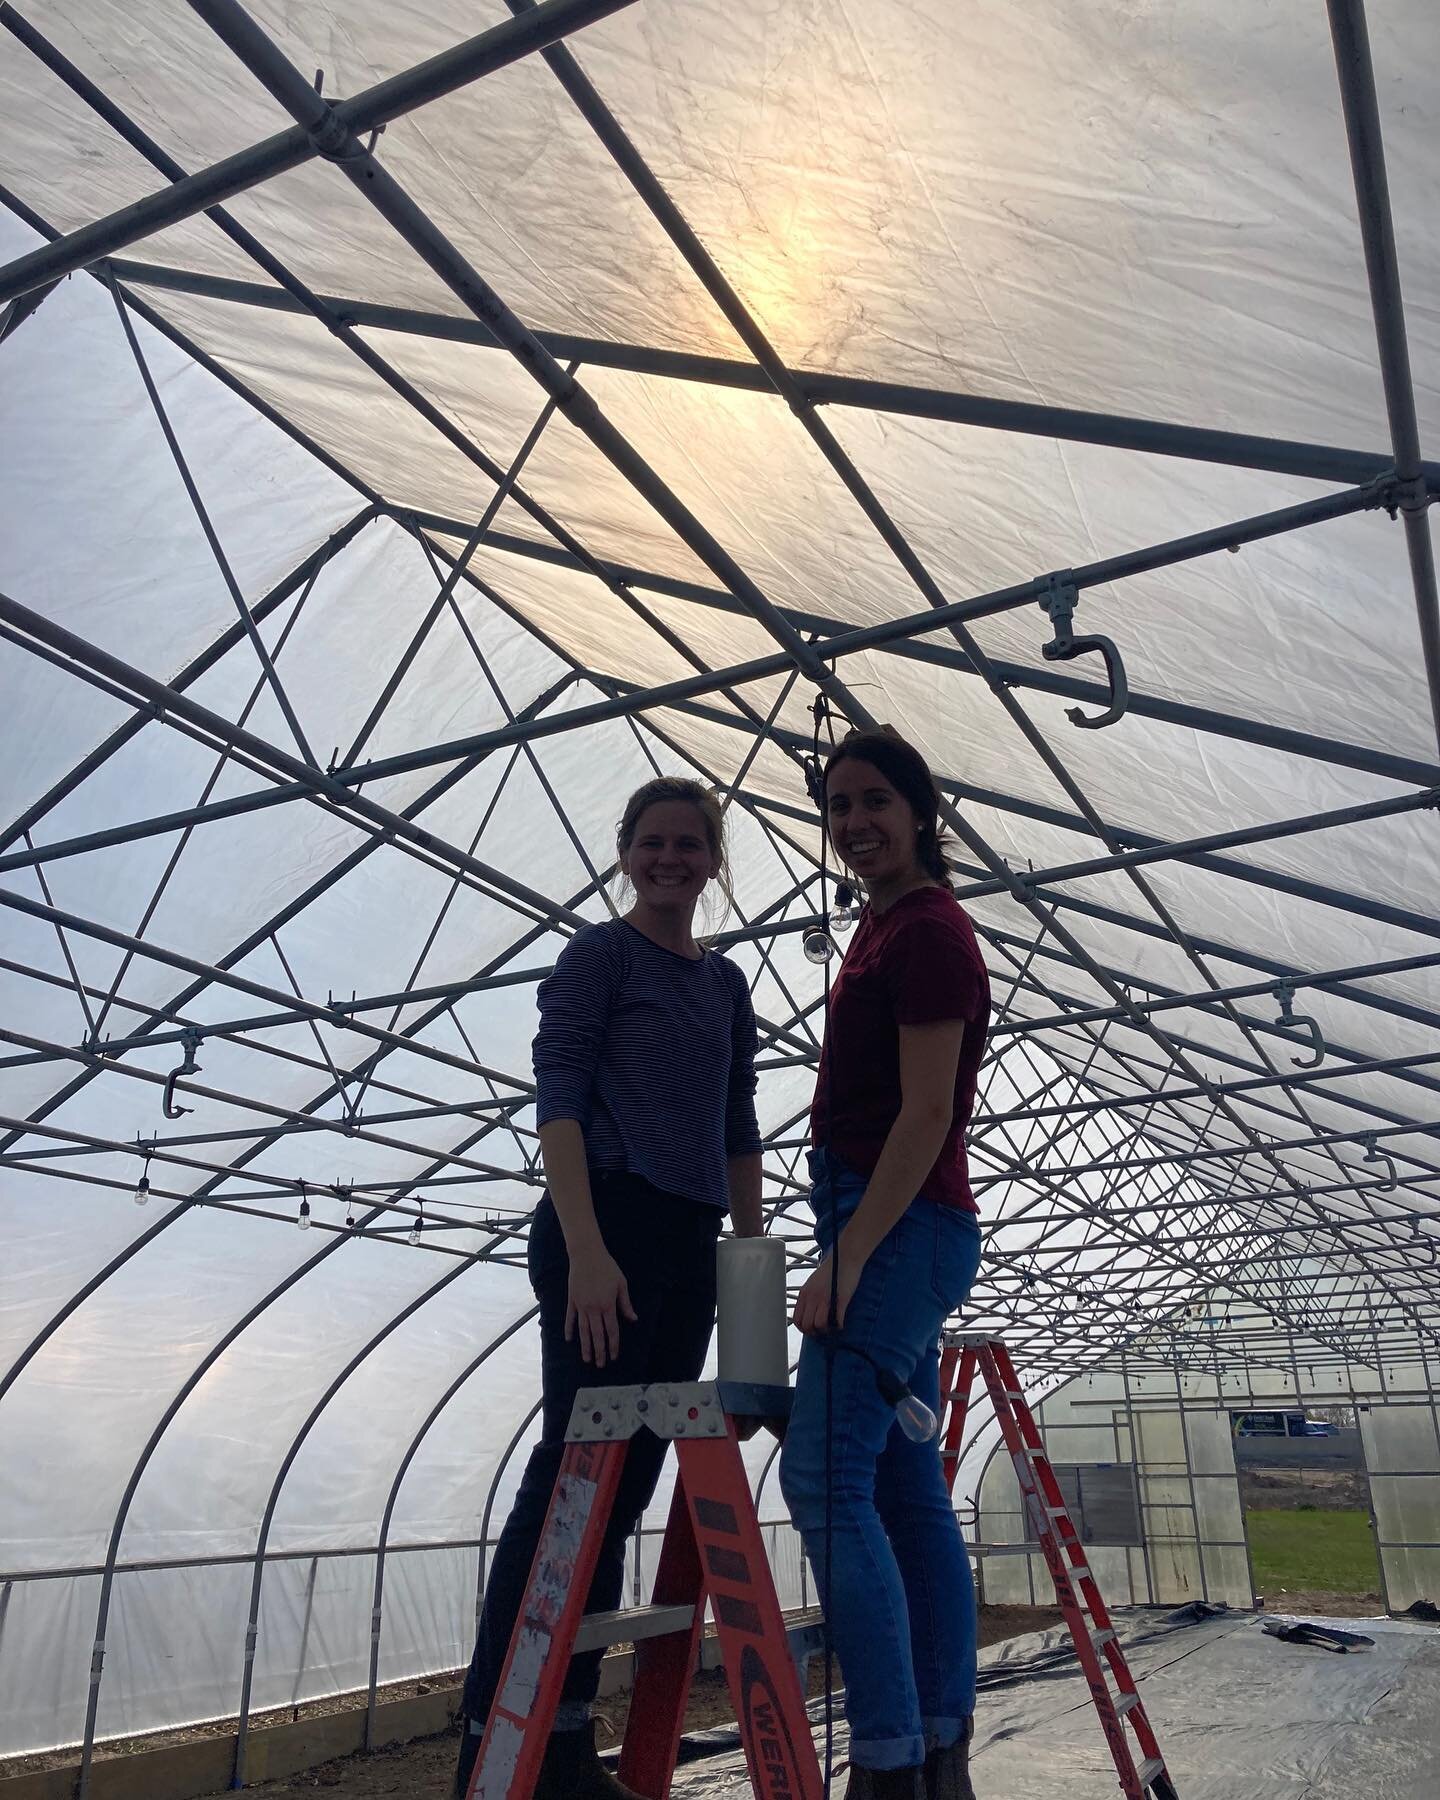 Working hard (and having fun 💃🏼) preparing our new greenhouse at the Urban Farm for an upcoming event!